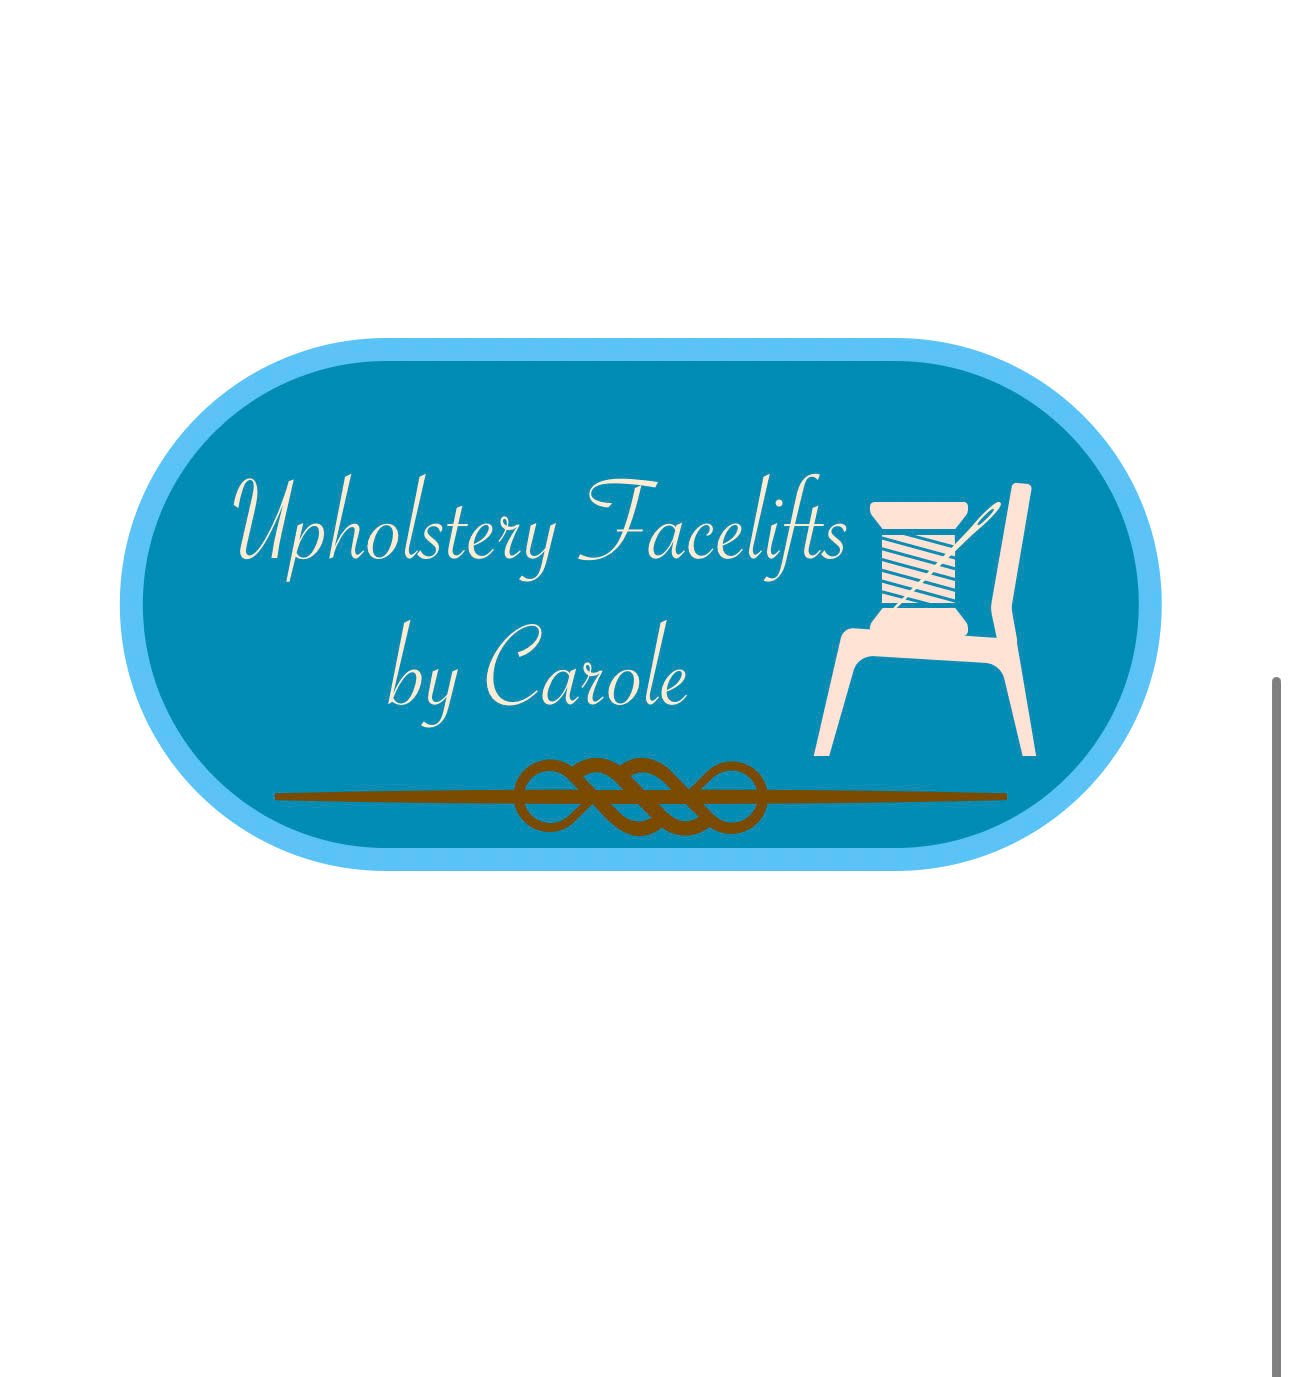 Upholstery Facelifts by Carole Logo